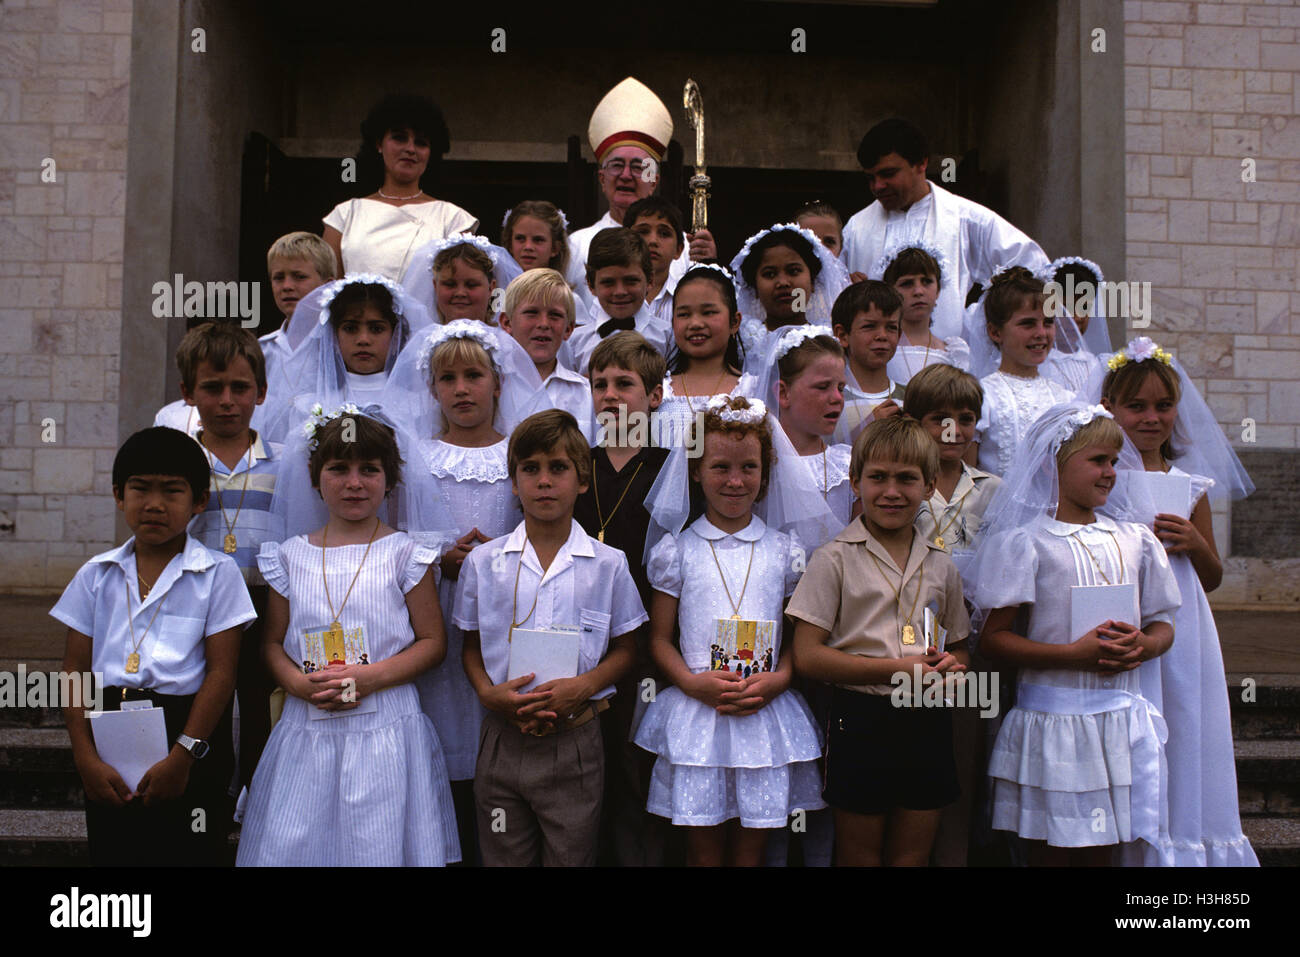 Children on the day of their first communion, Stock Photo